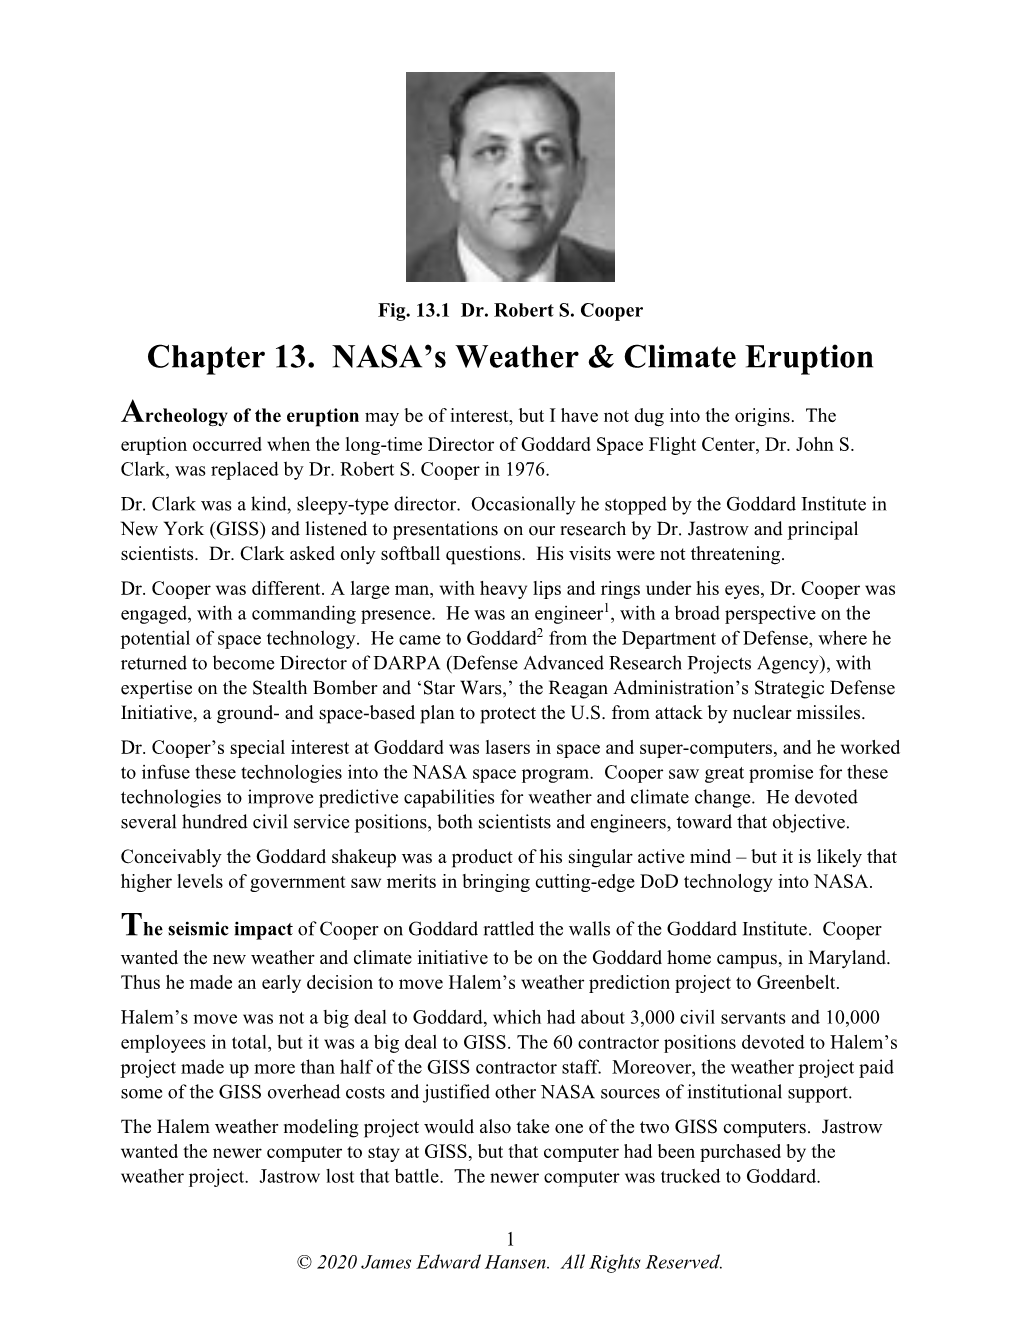 Chapter 13. NASA's Weather & Climate Eruption